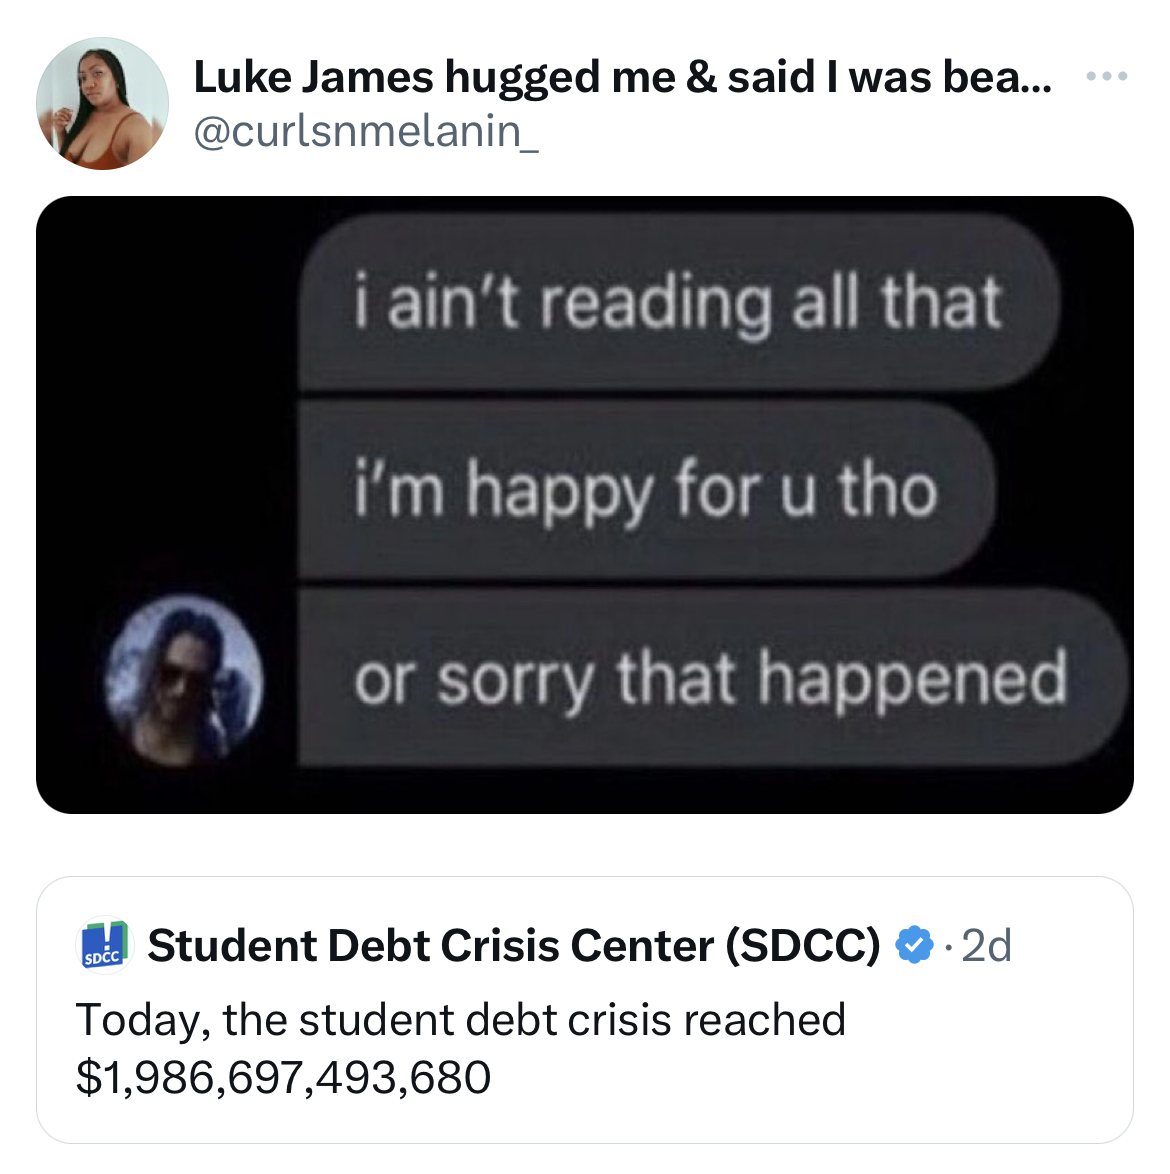 savage tweets - ain t reading allat - Luke James hugged me & said I was bea... i ain't reading all that i'm happy for u tho or sorry that happened Student Debt Crisis Center Sdcc 2d Today, the student debt crisis reached $1,986,697,493,680 Sdcc